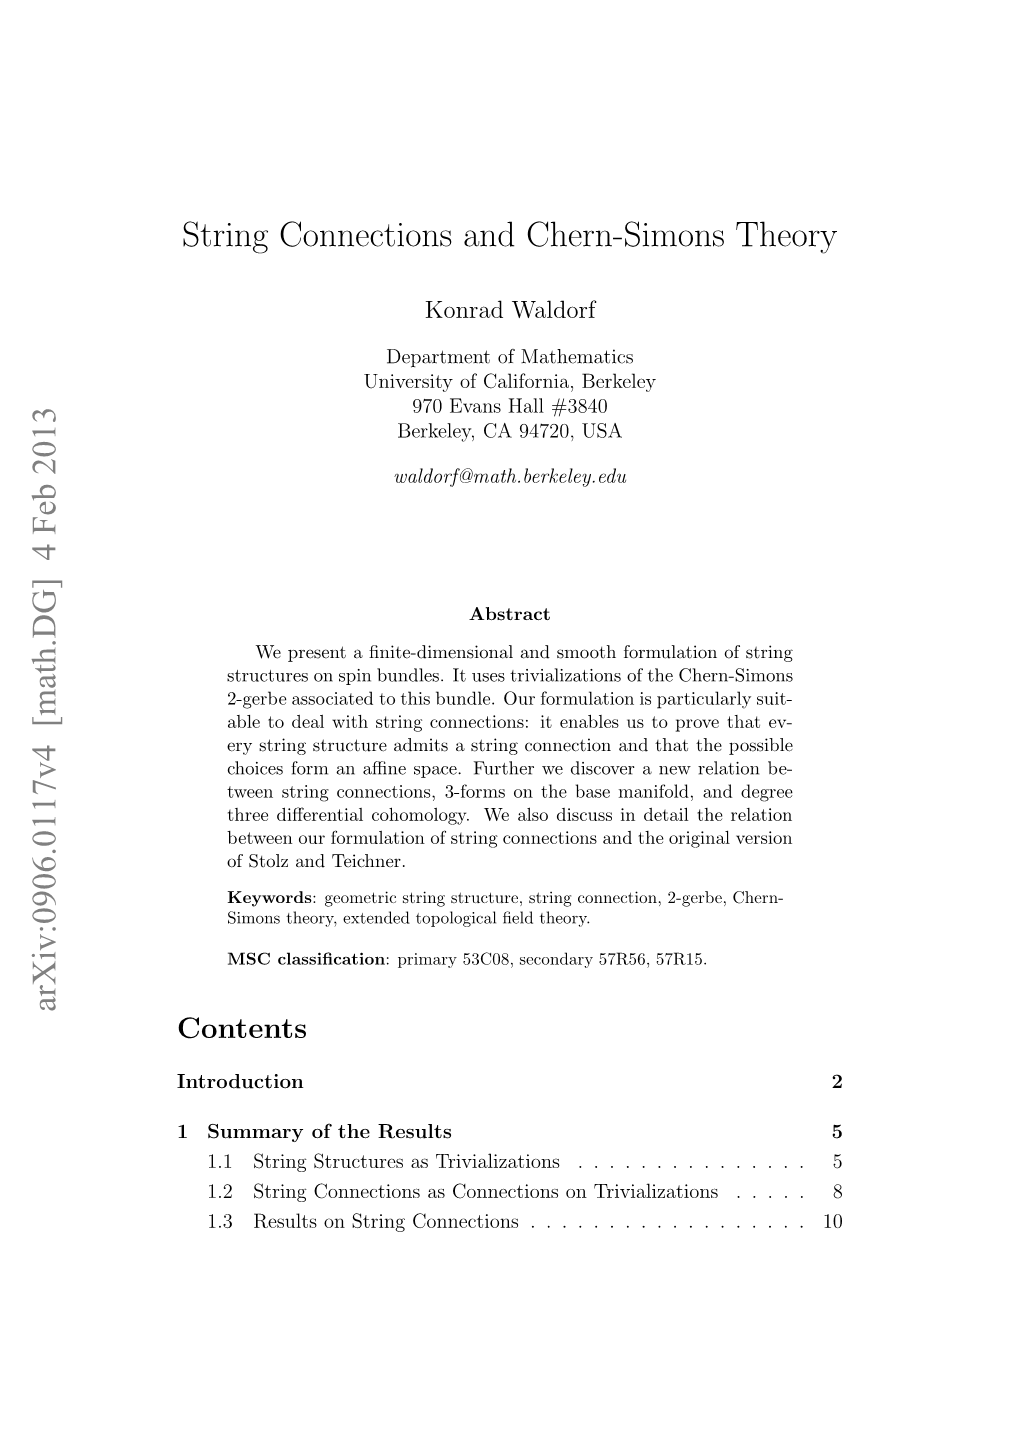 String Connections and Chern-Simons Theory